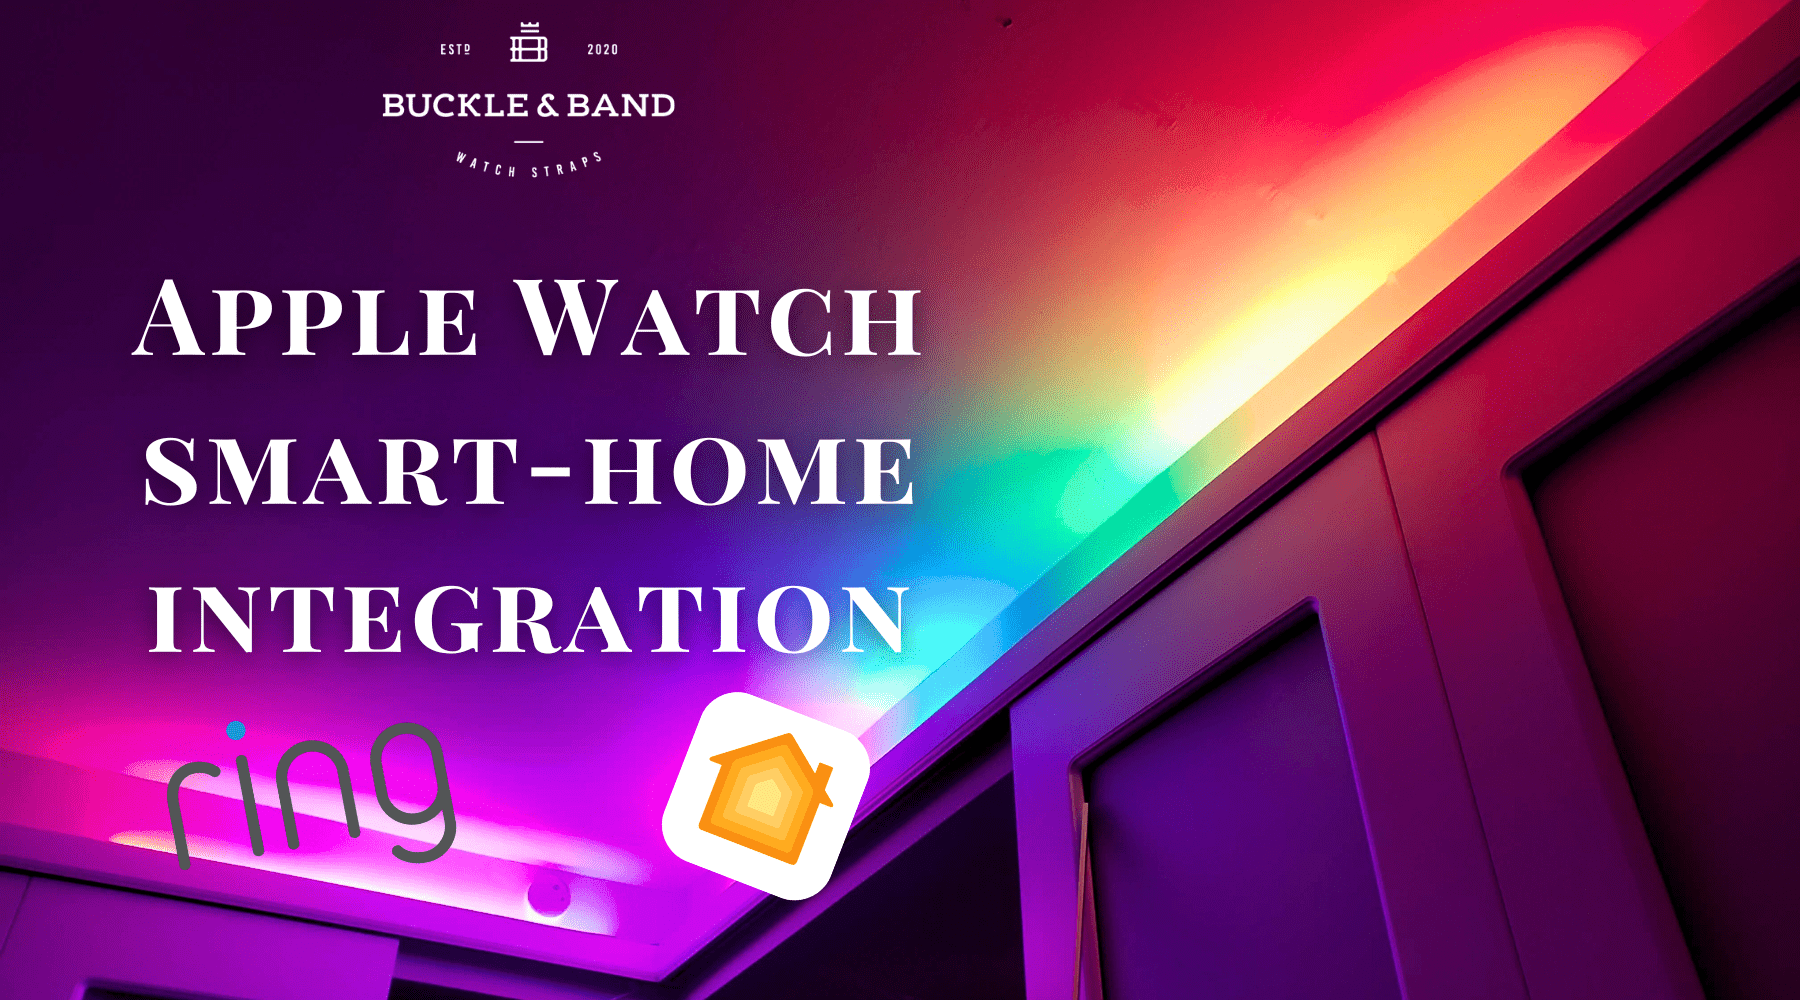 Apple Watch and Smart Home Automation - Buckle and Band